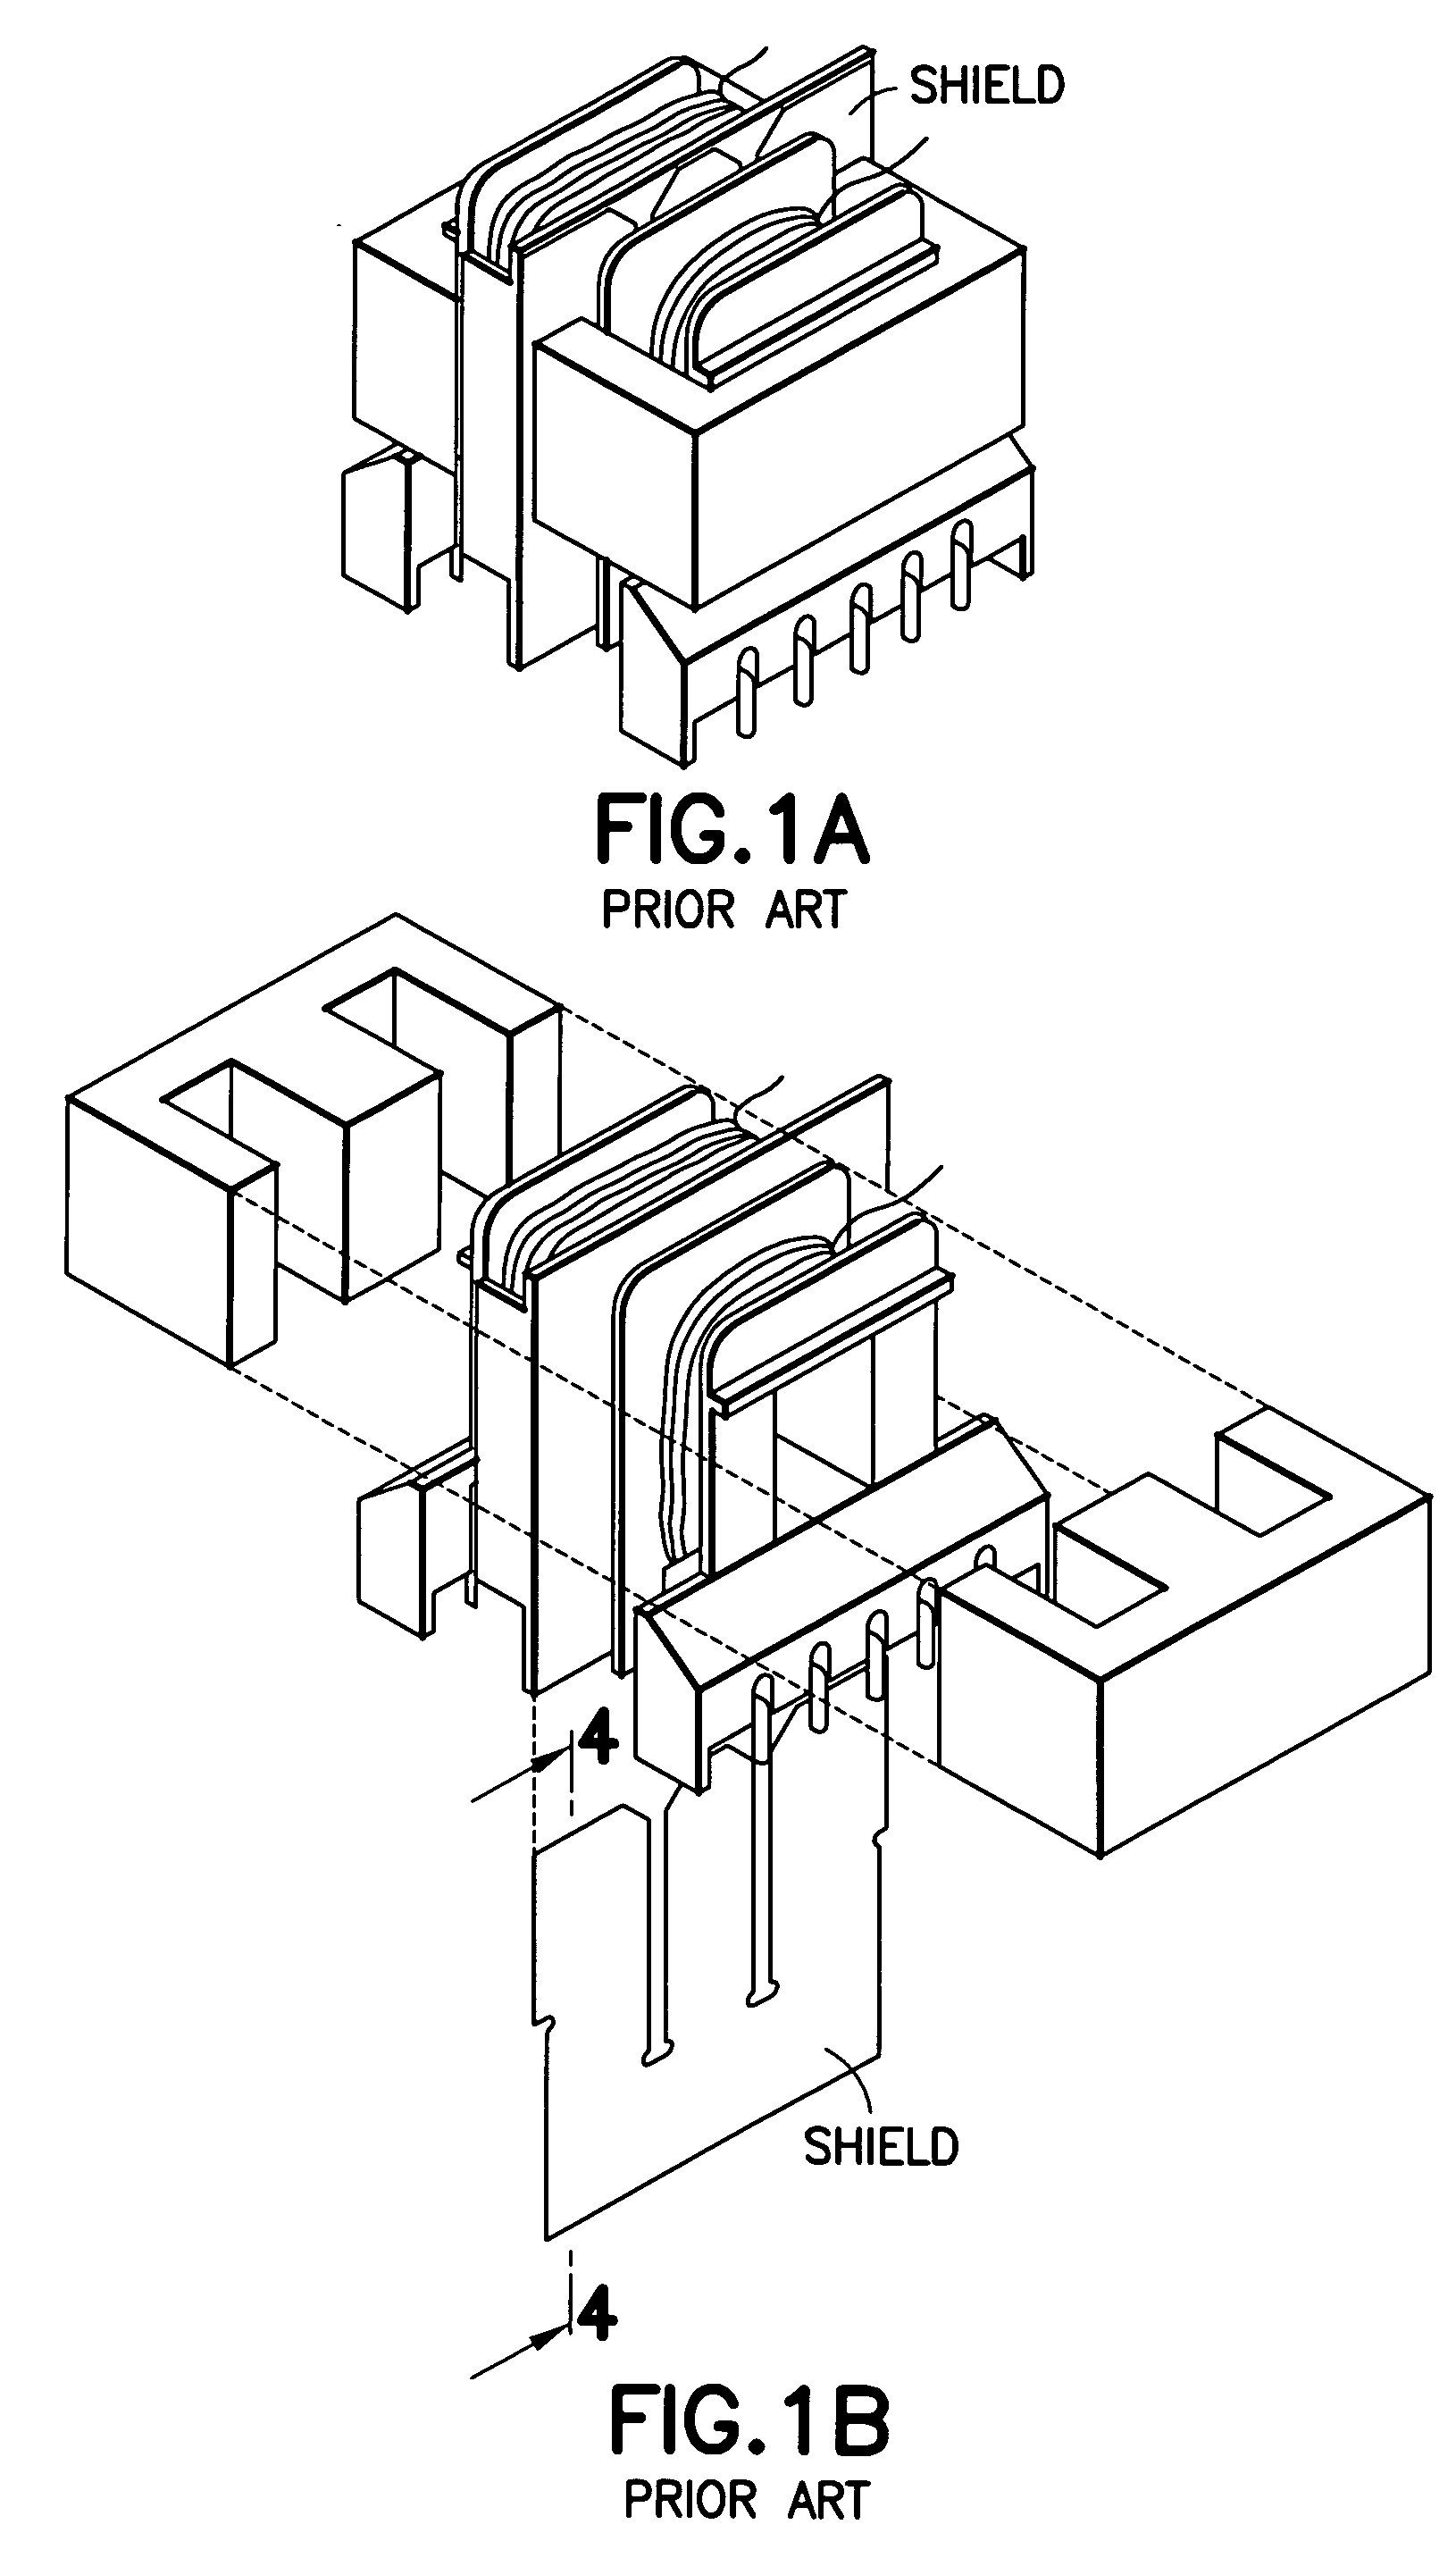 Electrically decoupled integrated transformer having at least one grounded electric shield